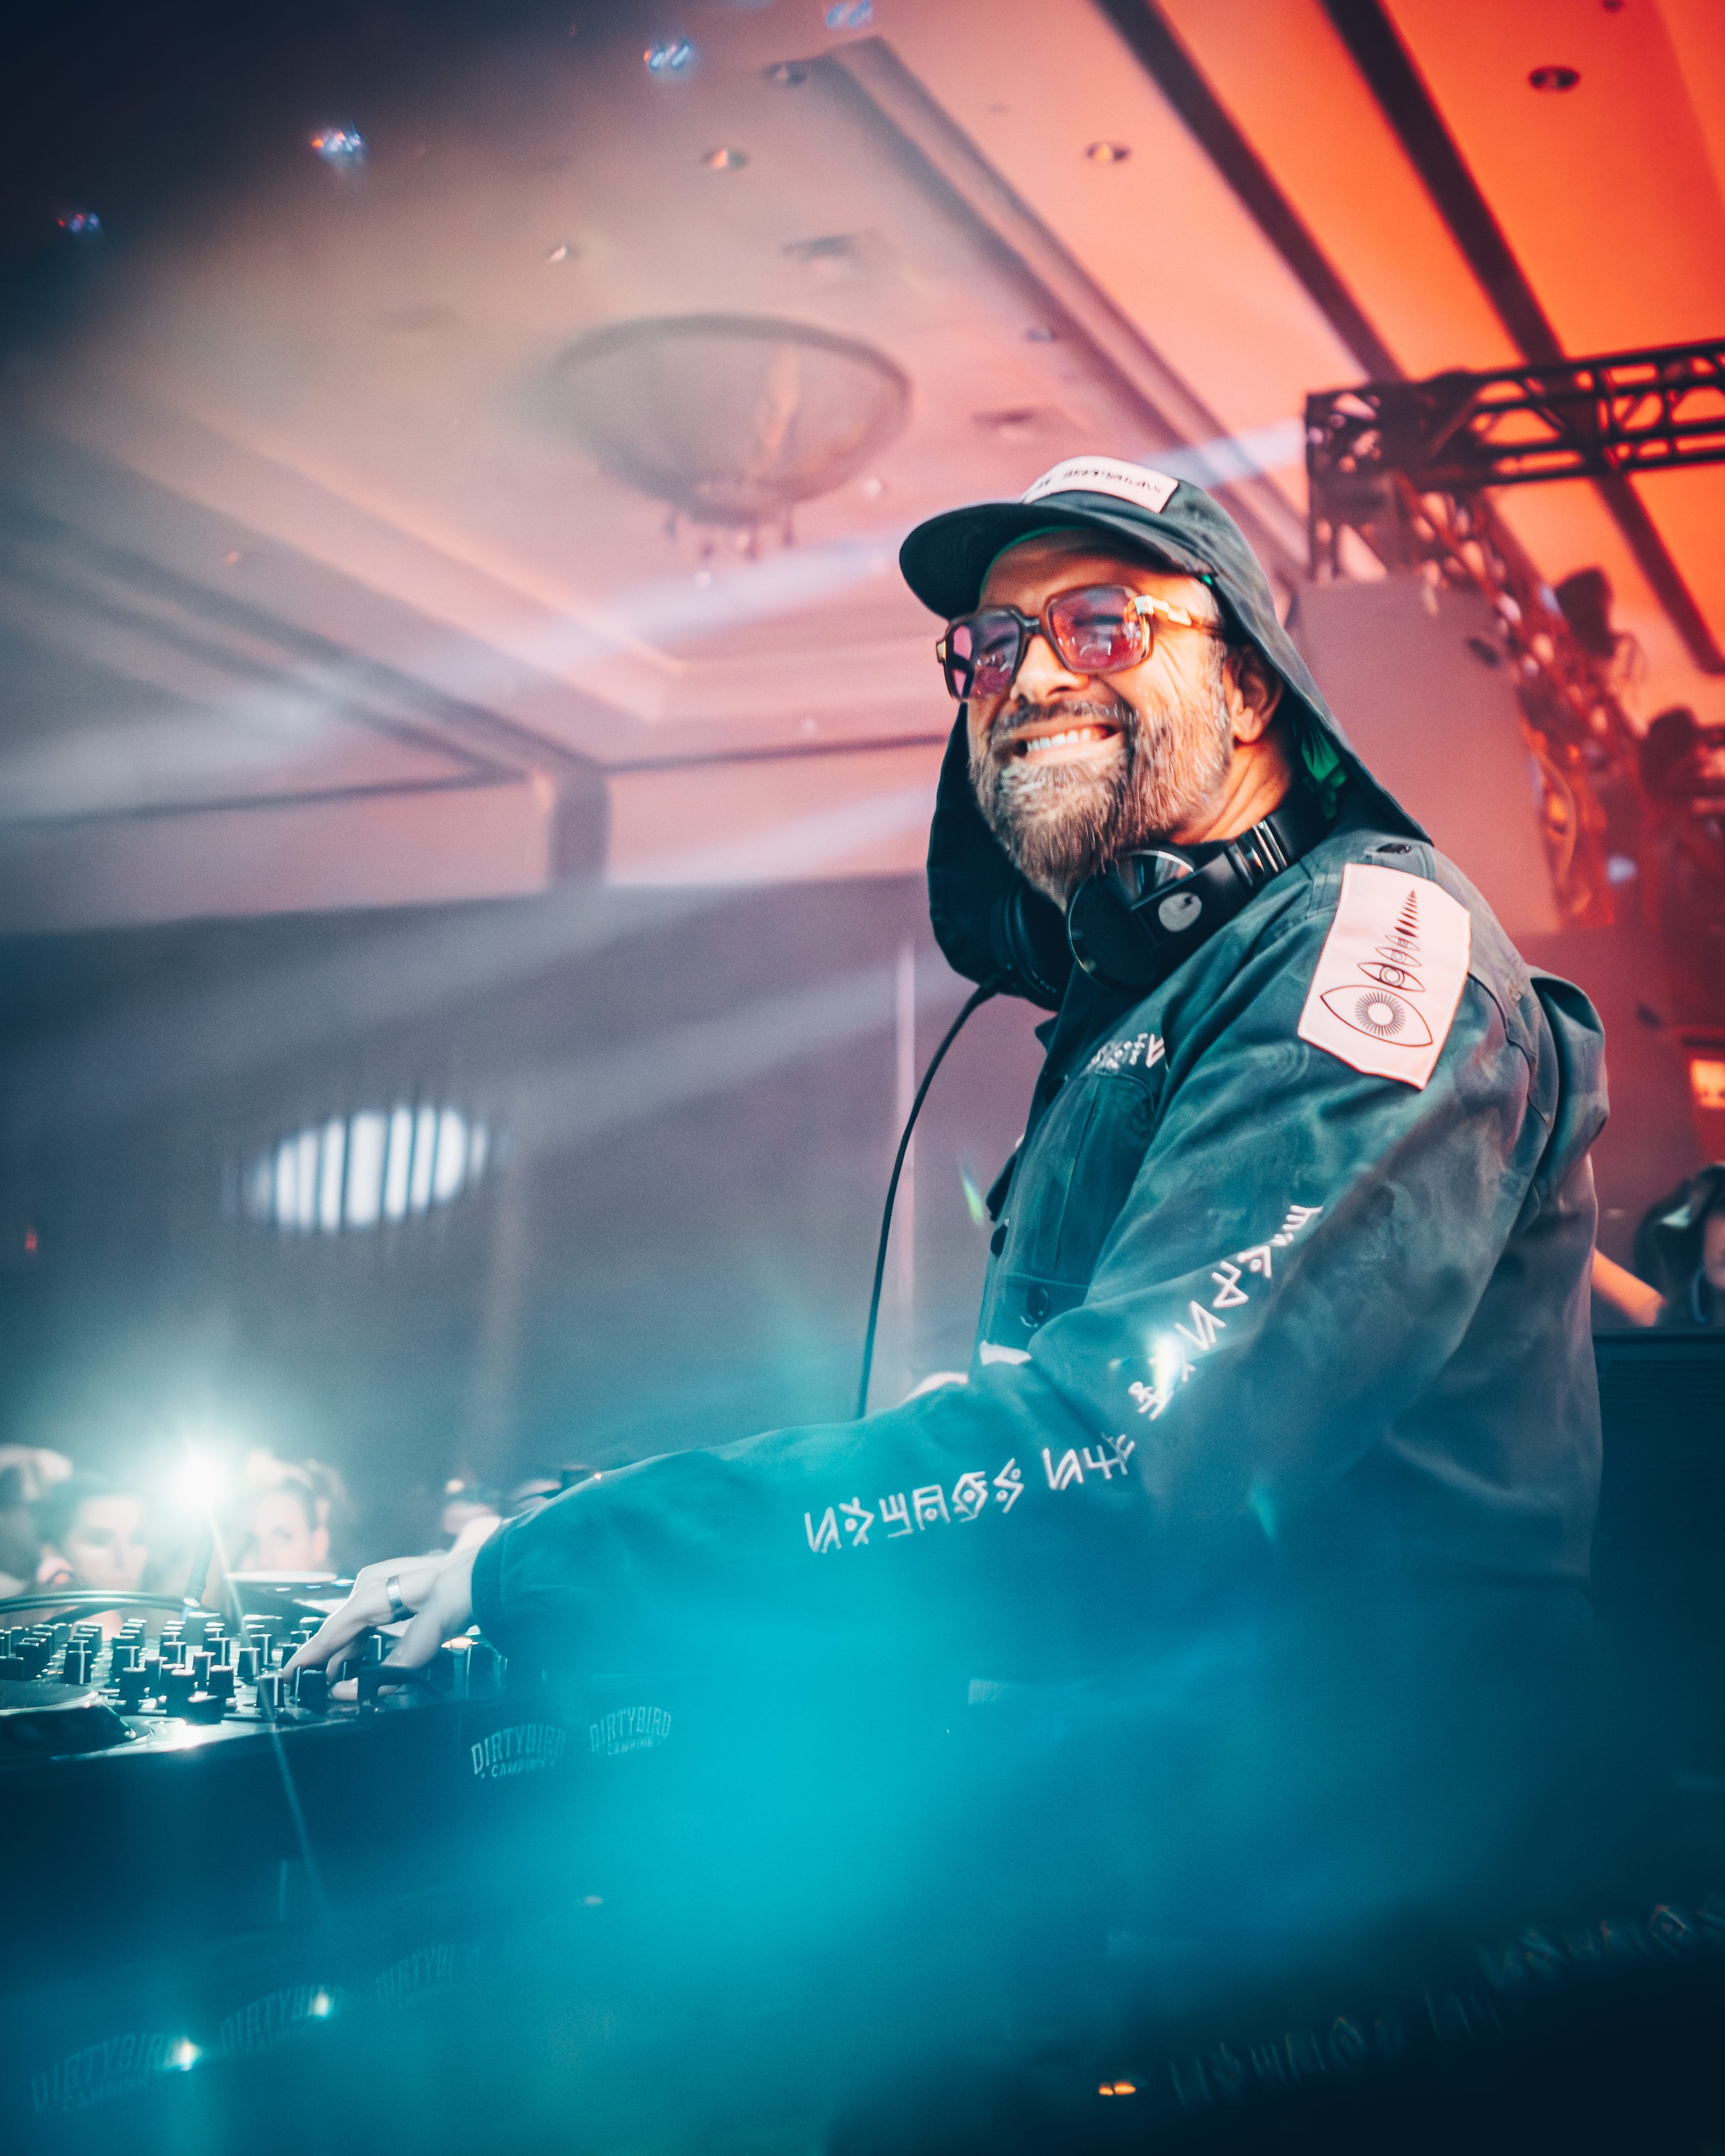 Barclay Crenshaw (fka Claude VonStroke) performs at Elektricity in Pontiac on Friday.